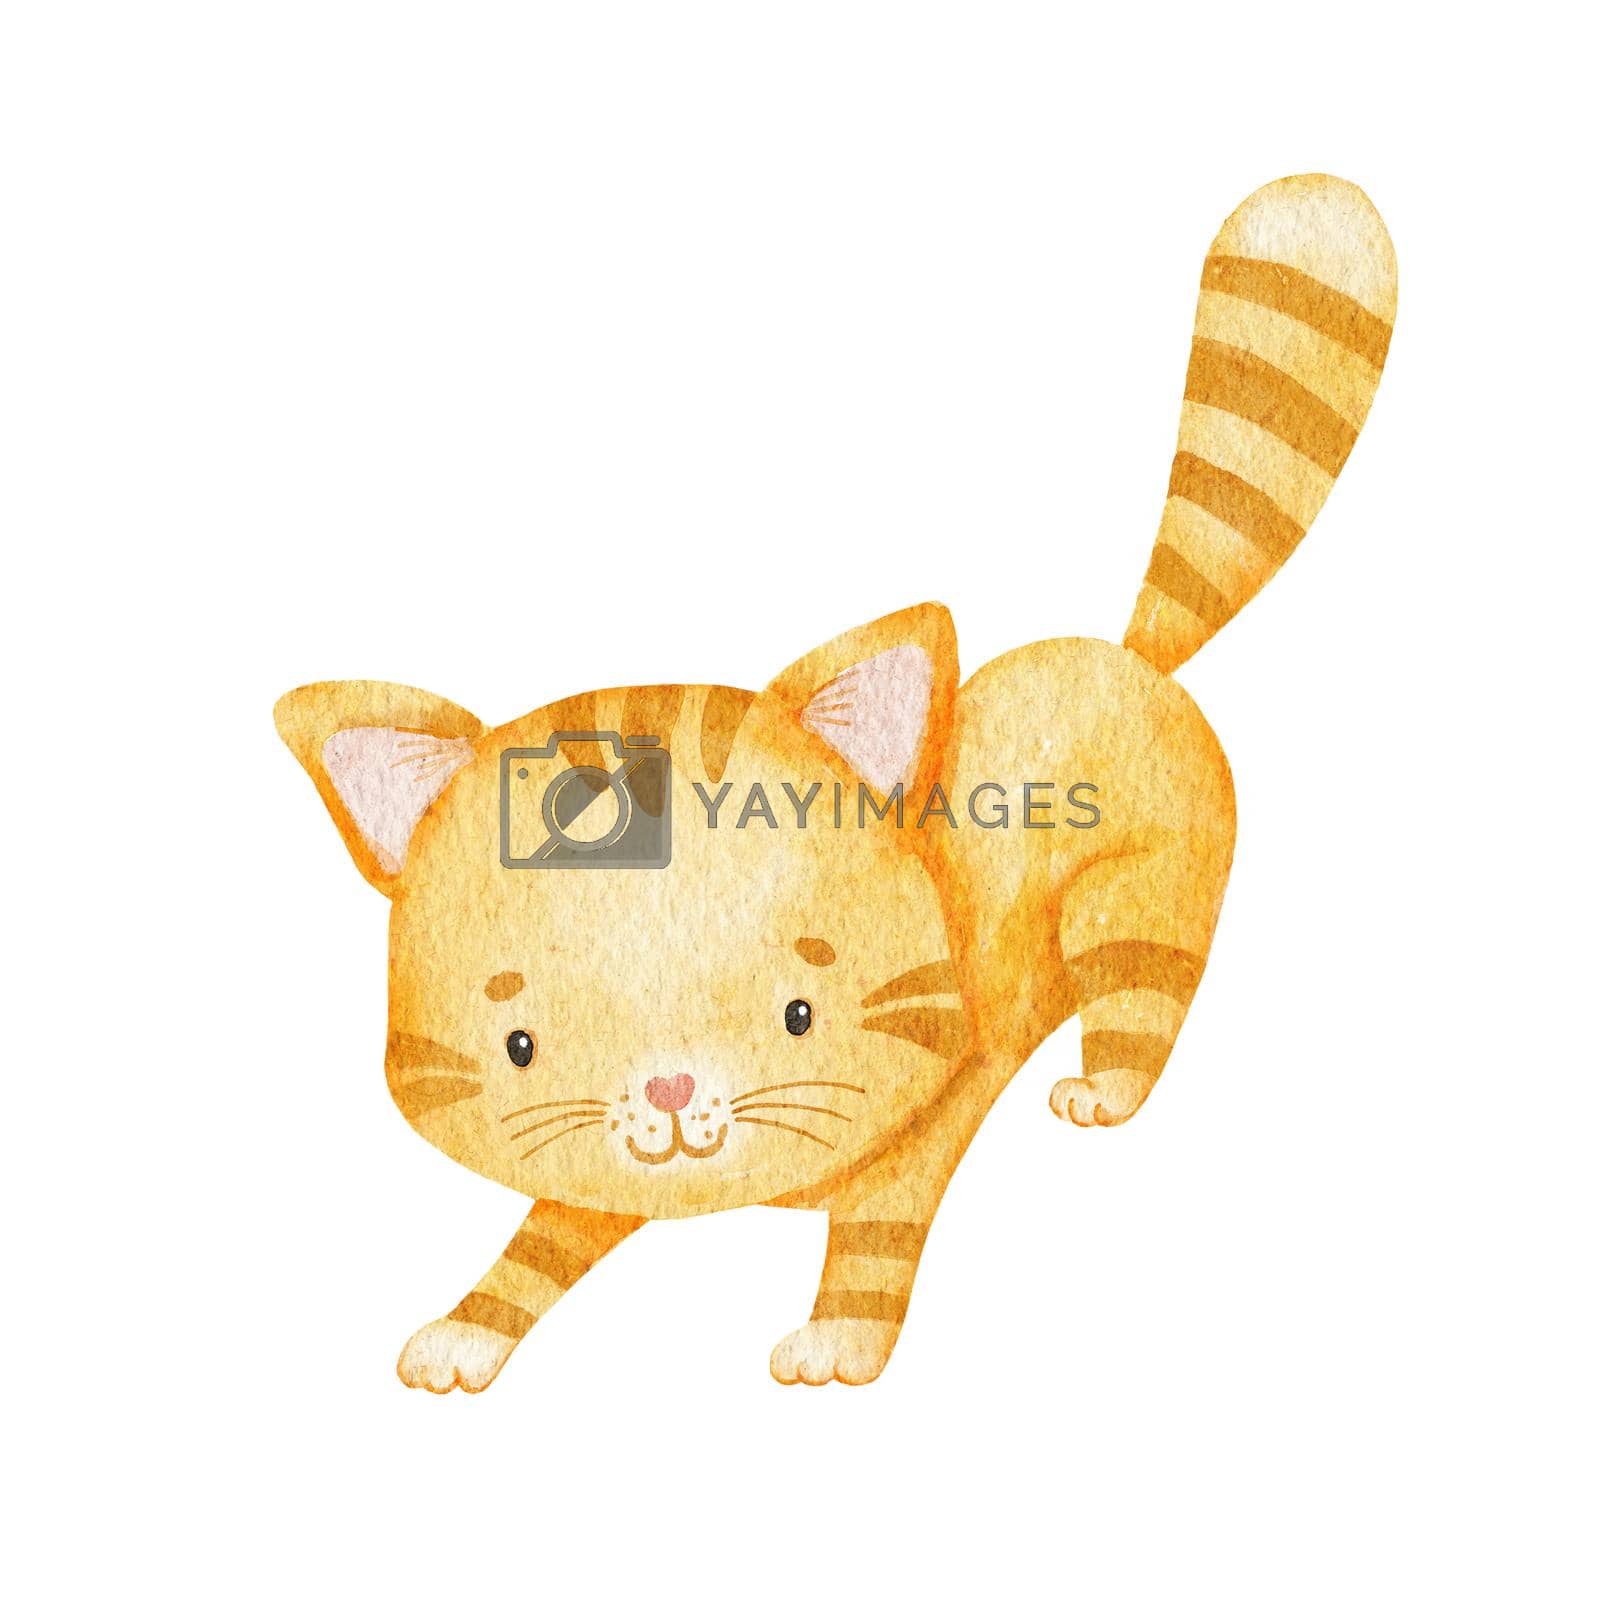 Royalty free image of Cute funny cat. Watercolor character illustration Isolated on white background. Red kitty playing by ElenaPlatova